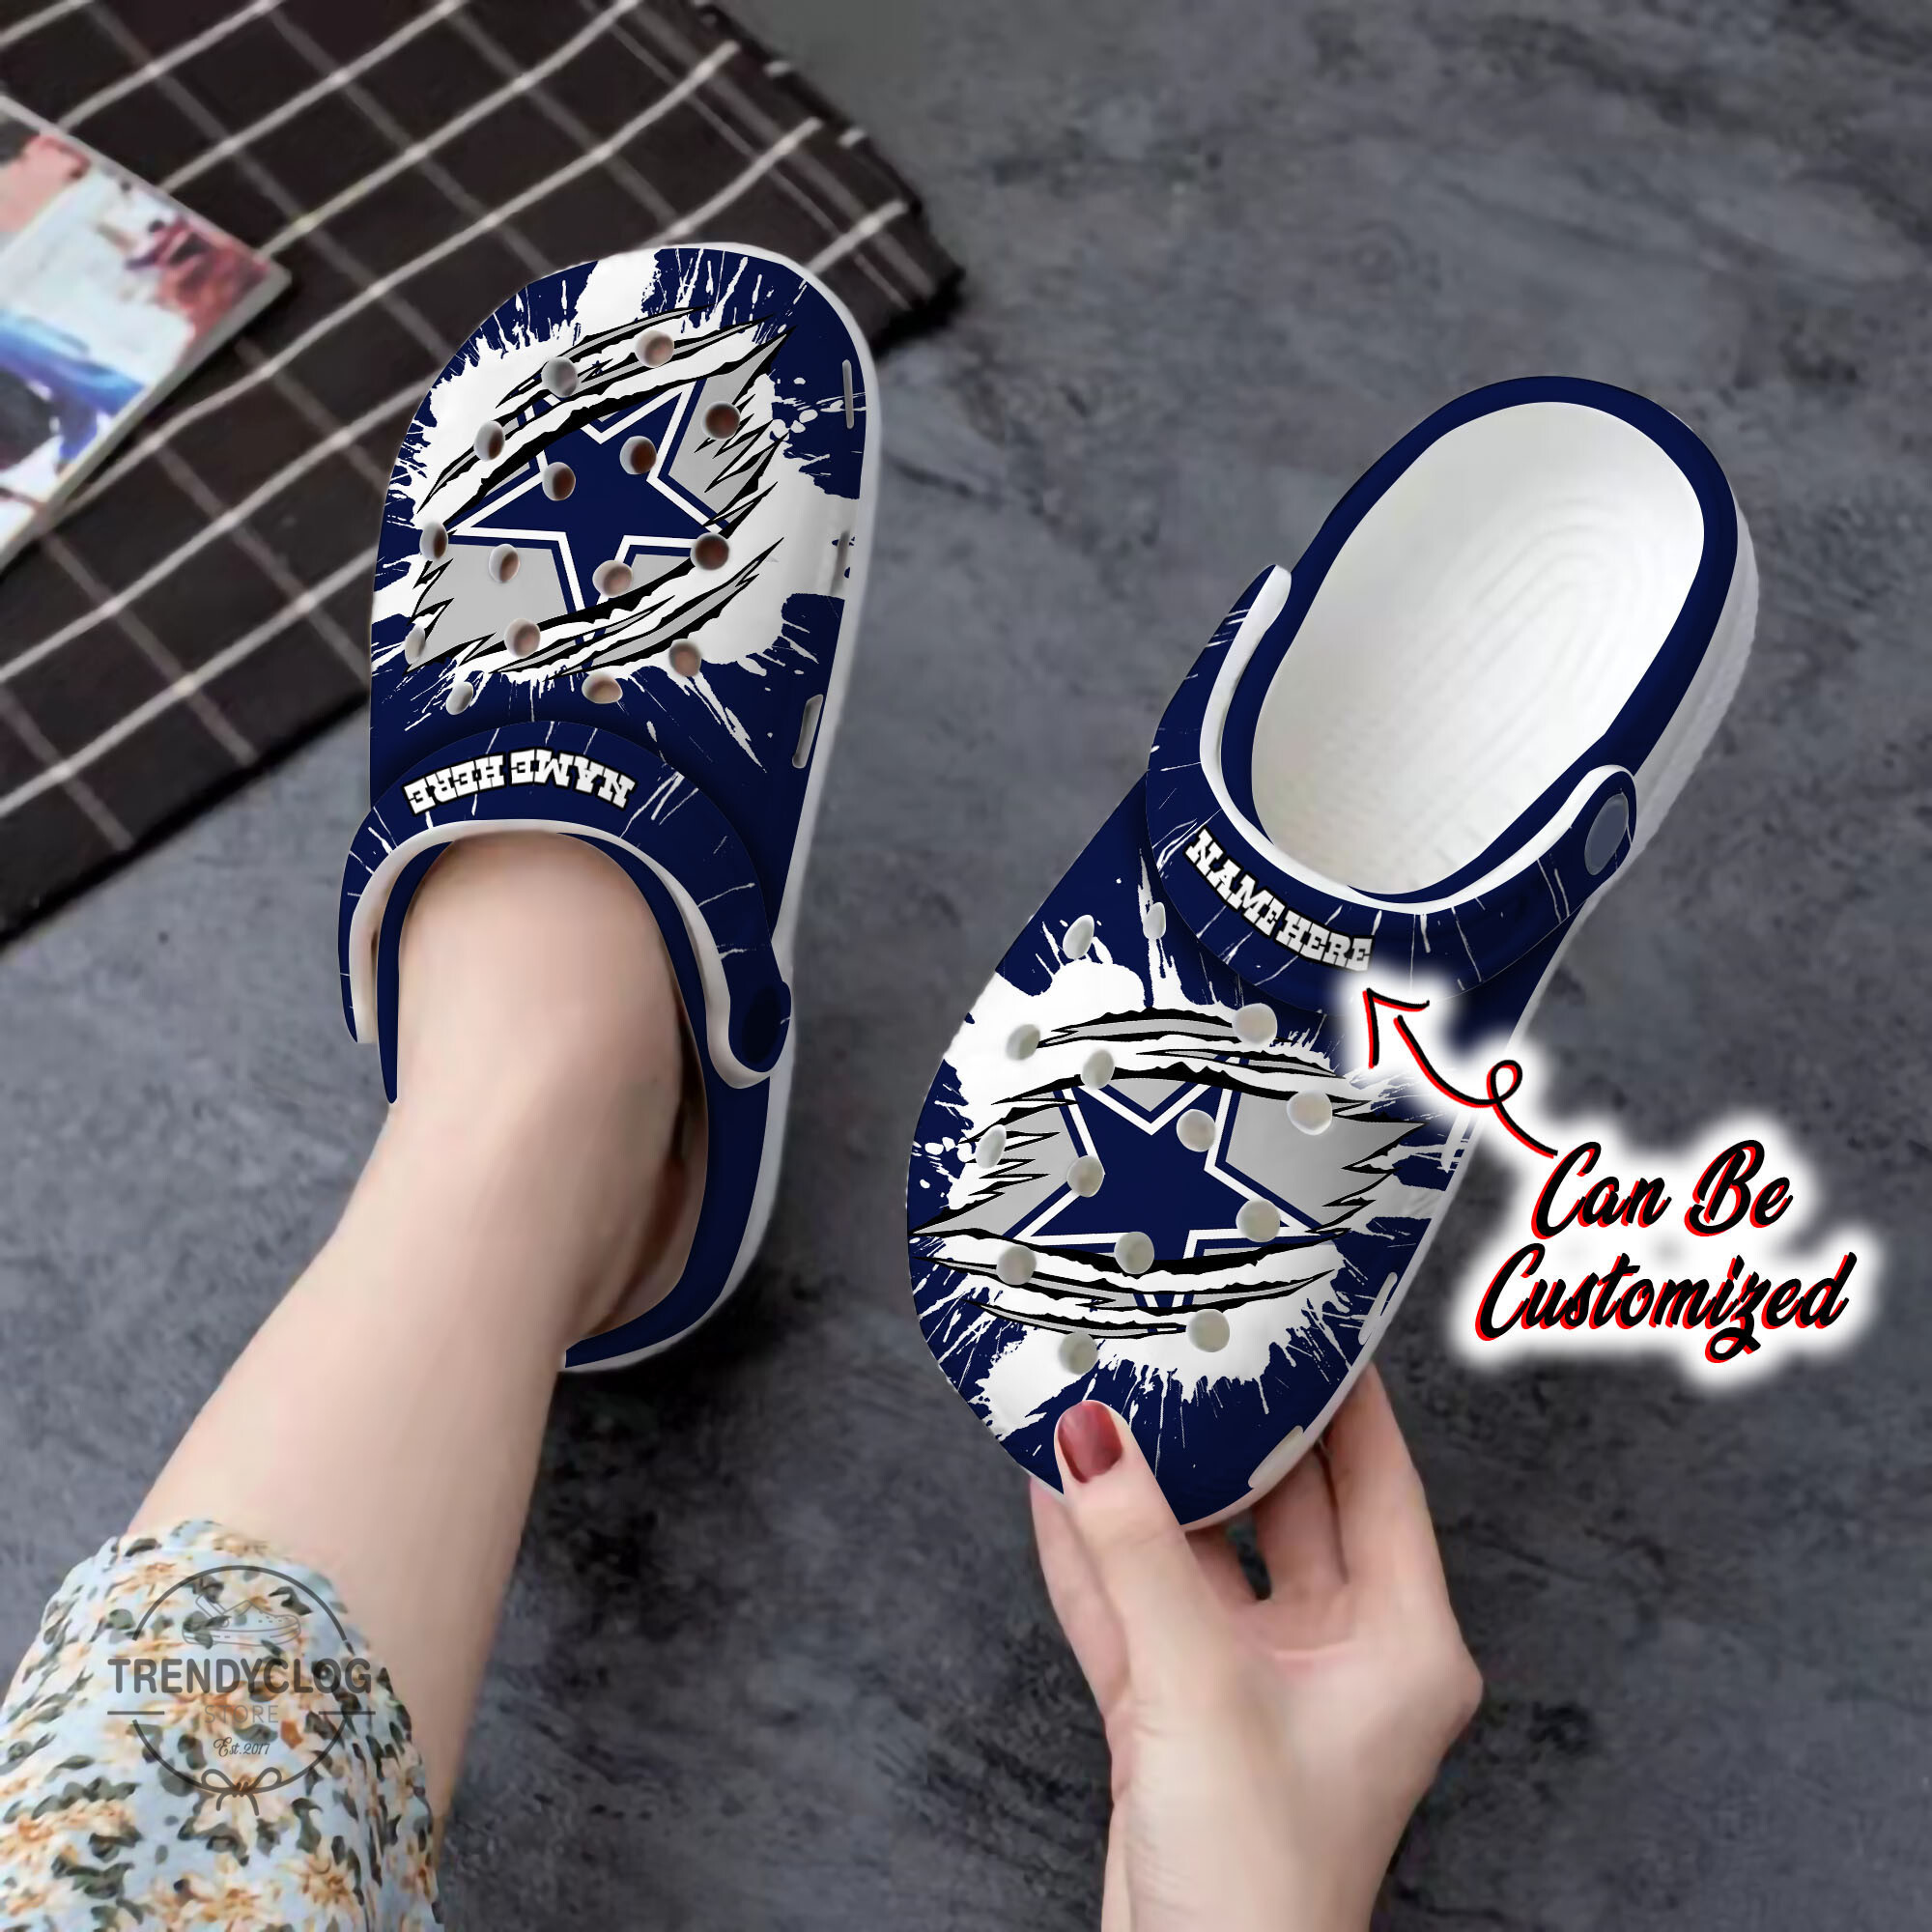 Cowboys Personalized DCowboys Football Ripped Claw Clog Crocs Shoes